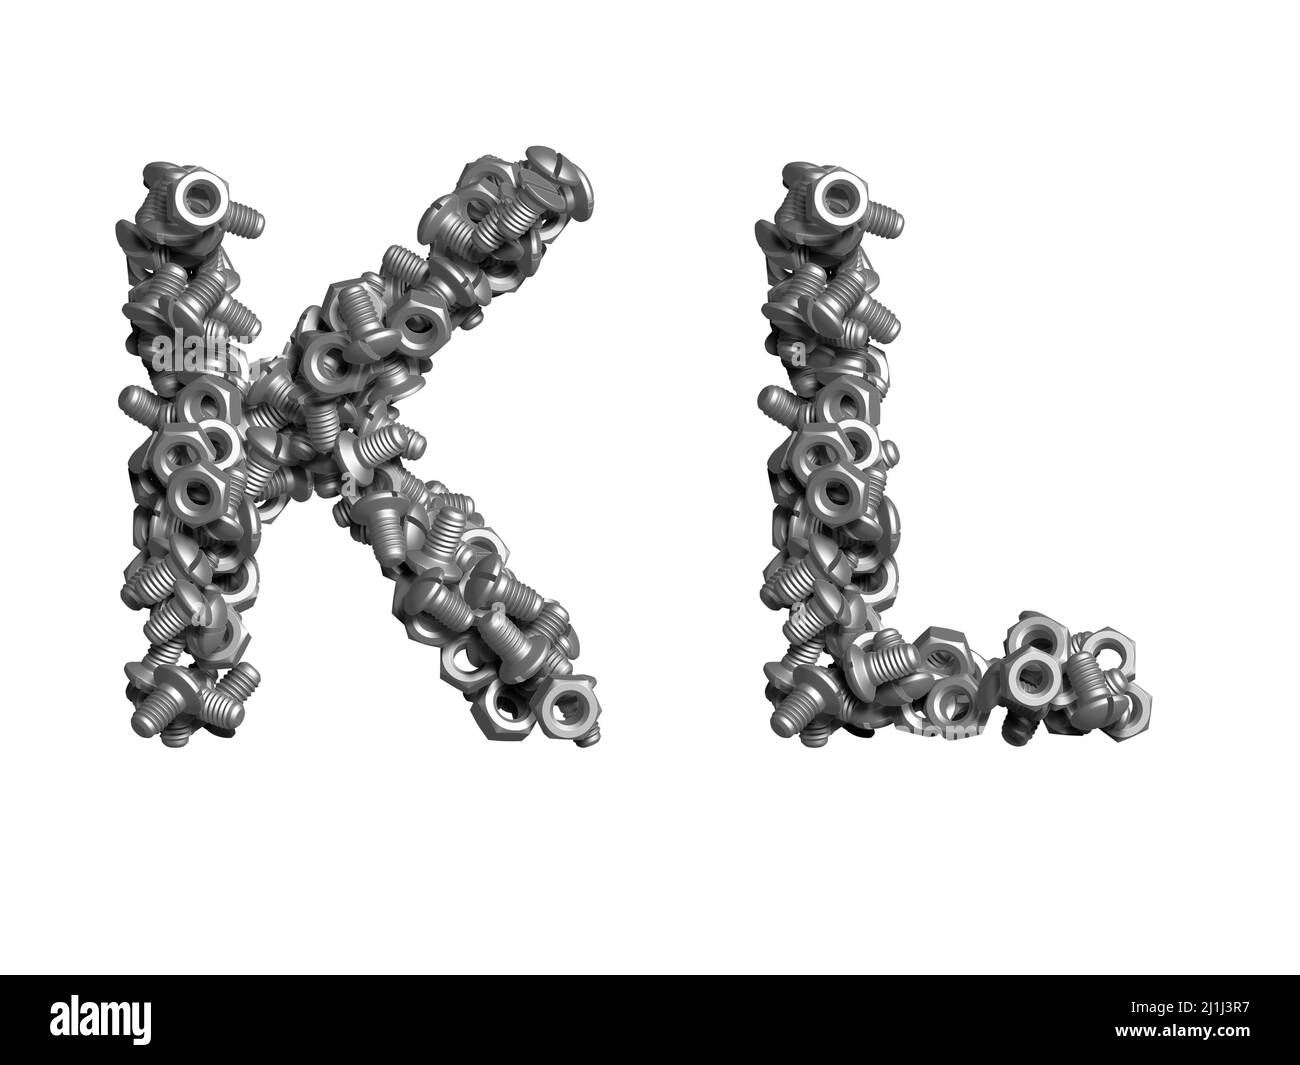 3d alphabet, uppercase letters made of bolts, 3d illustration on white background, K L Stock Photo